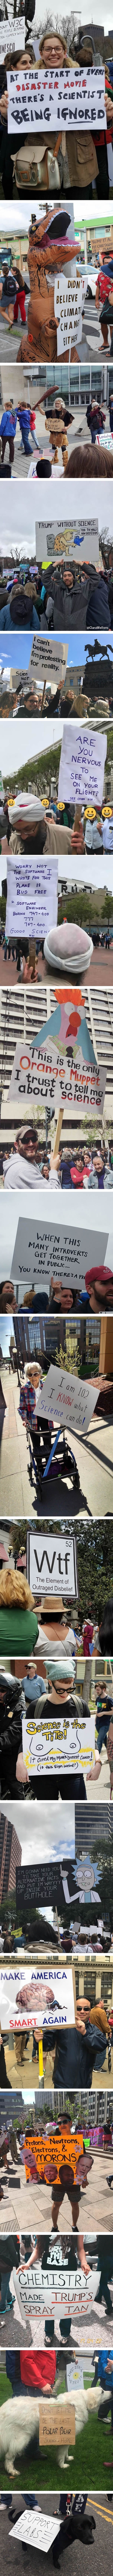 Best signs from the march for science